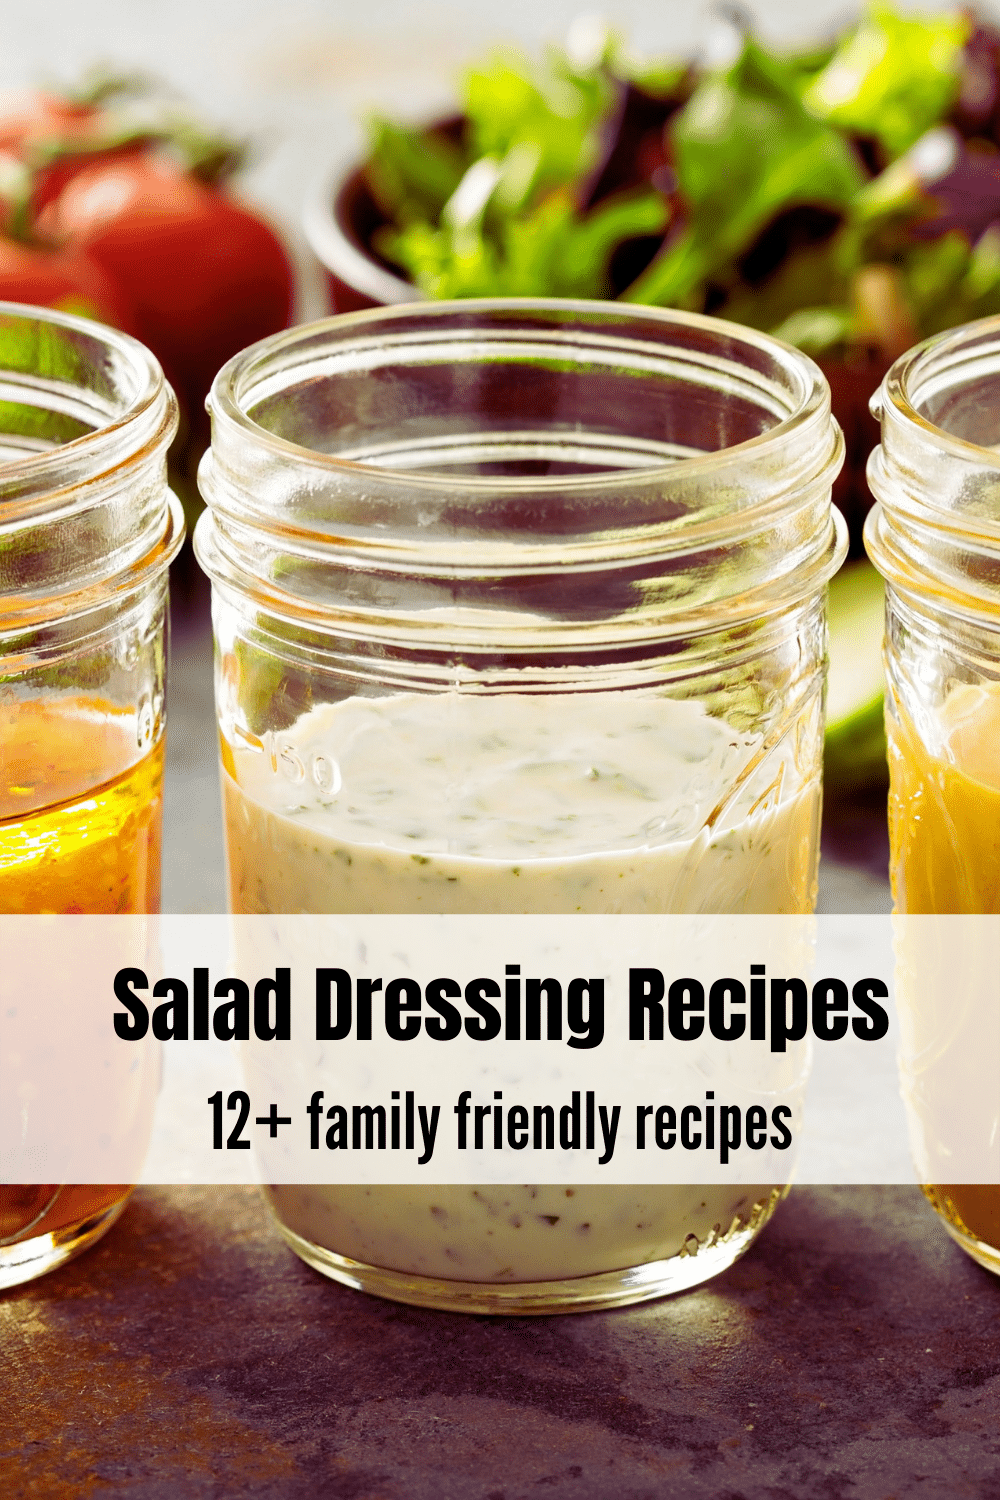 These easy salad dressing recipes are so delicious and perfect for every season! Use them on your favorite salads, as veggie dips, or even on sandwiches and veggie burgers.